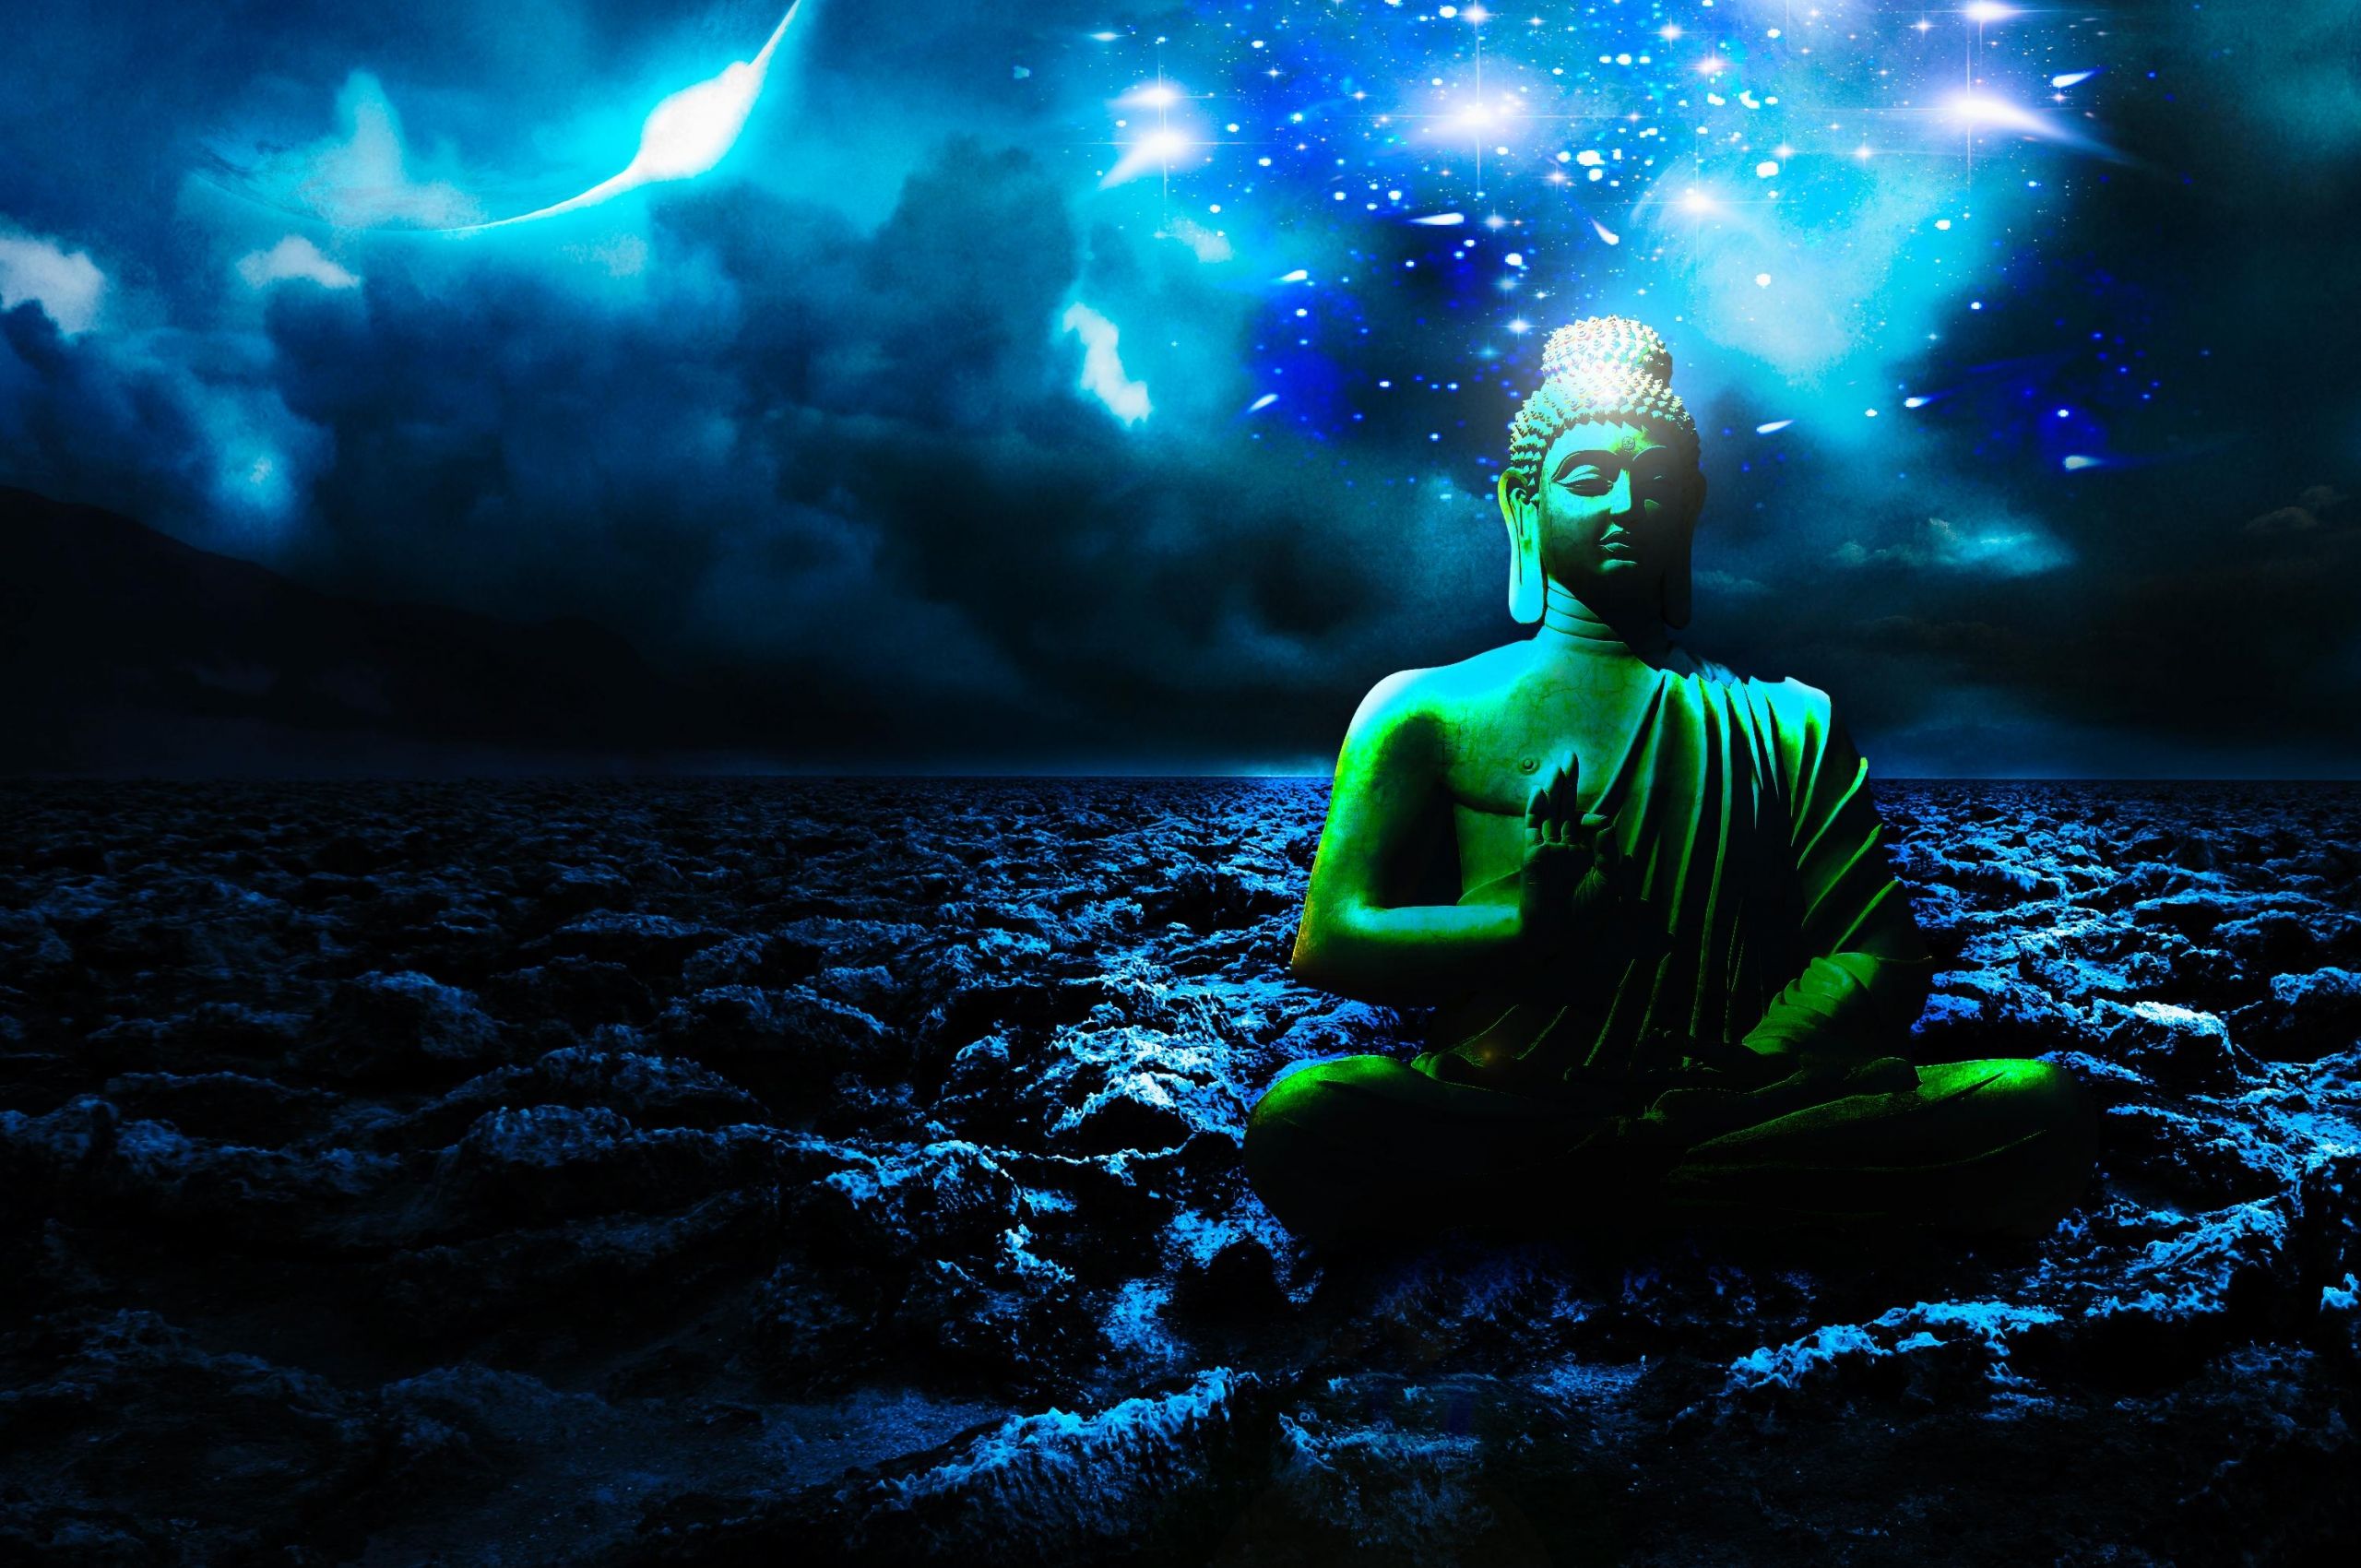 Free download Buddha 3D Wallpaper Picture 8928 Wallpaper MoshLab